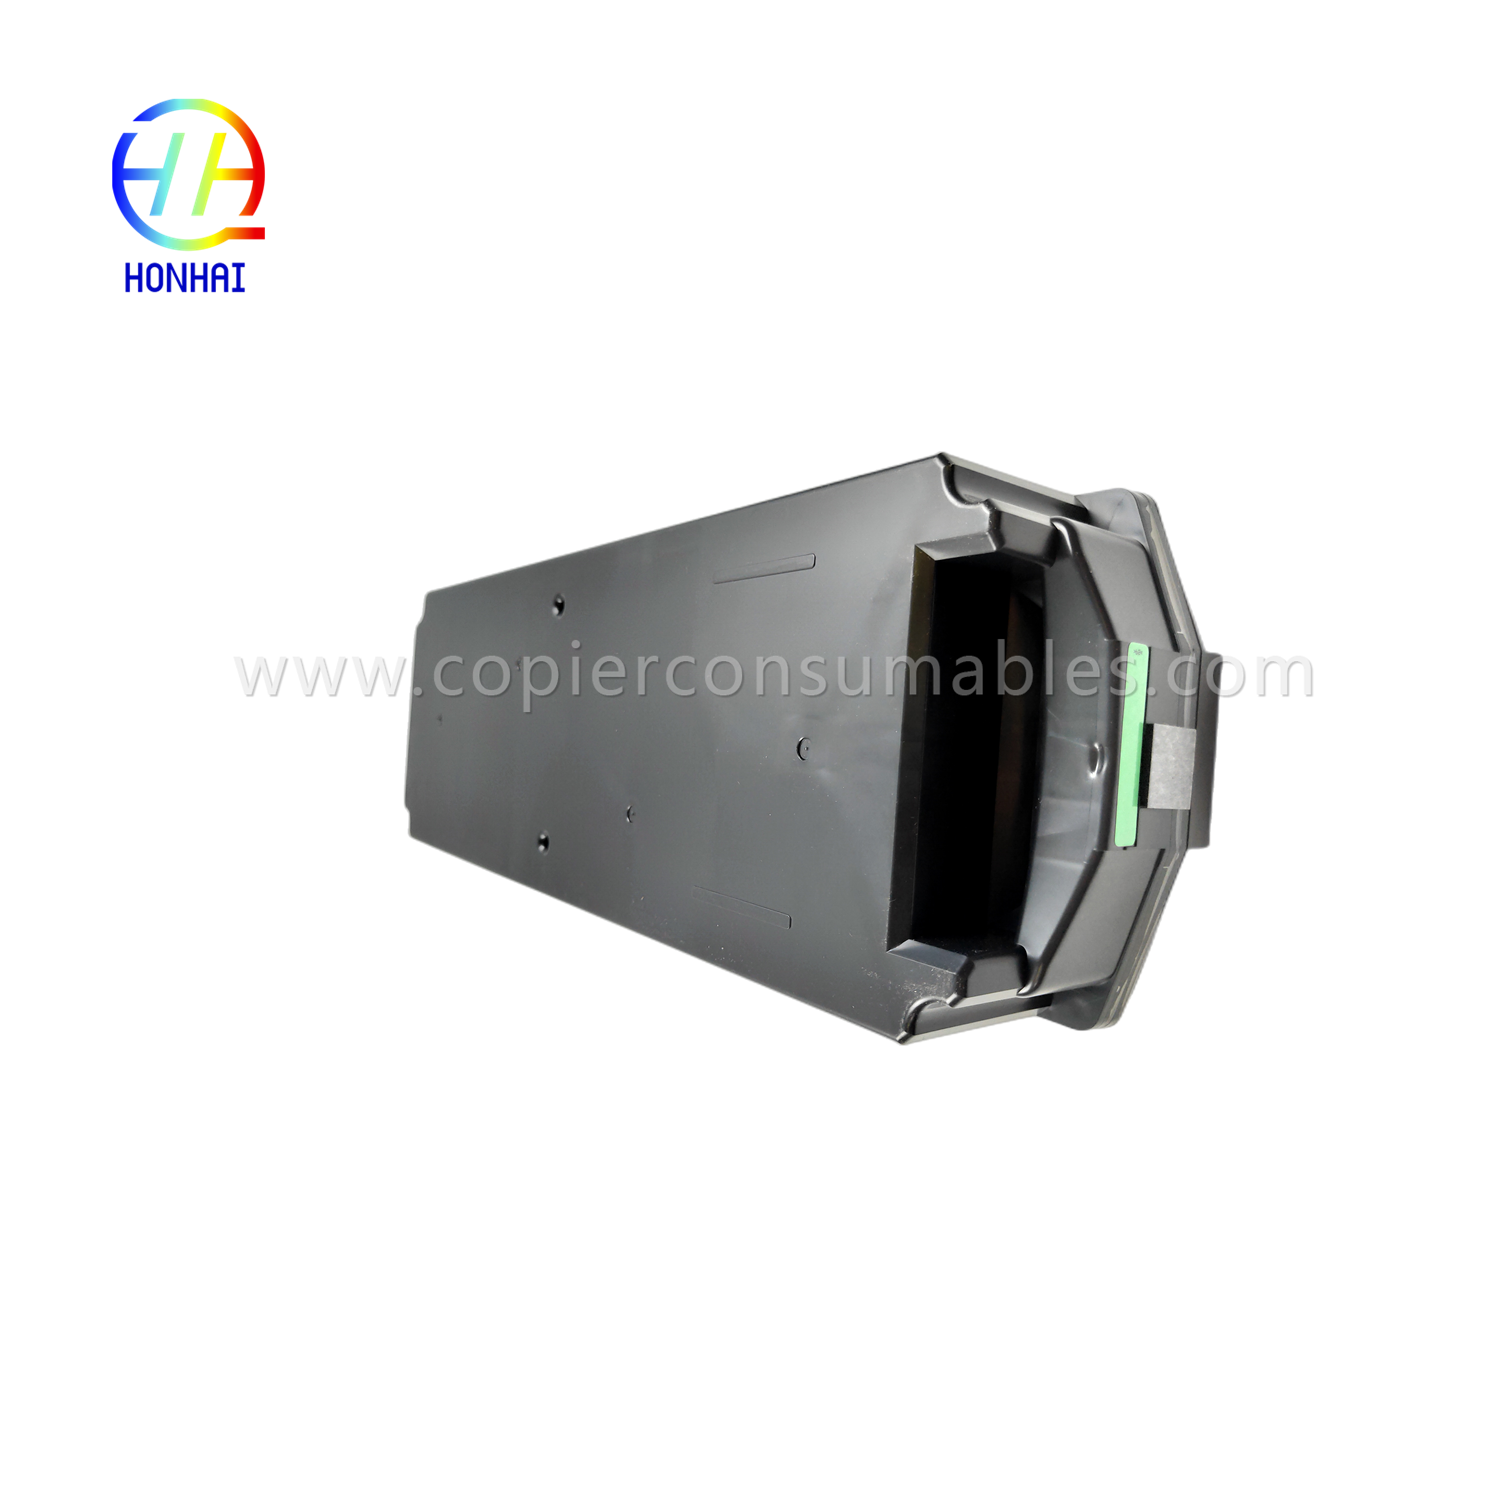 https://www.copierconsumables.com/waste-toner-bottle-for-ricoh-d2426400-mpc2003-c2004-c2503-c2504-c3003-c3004-c3503-c3504-c4503-c503-c5040c ihe mkpofu-toner-container-ngwaahịa/